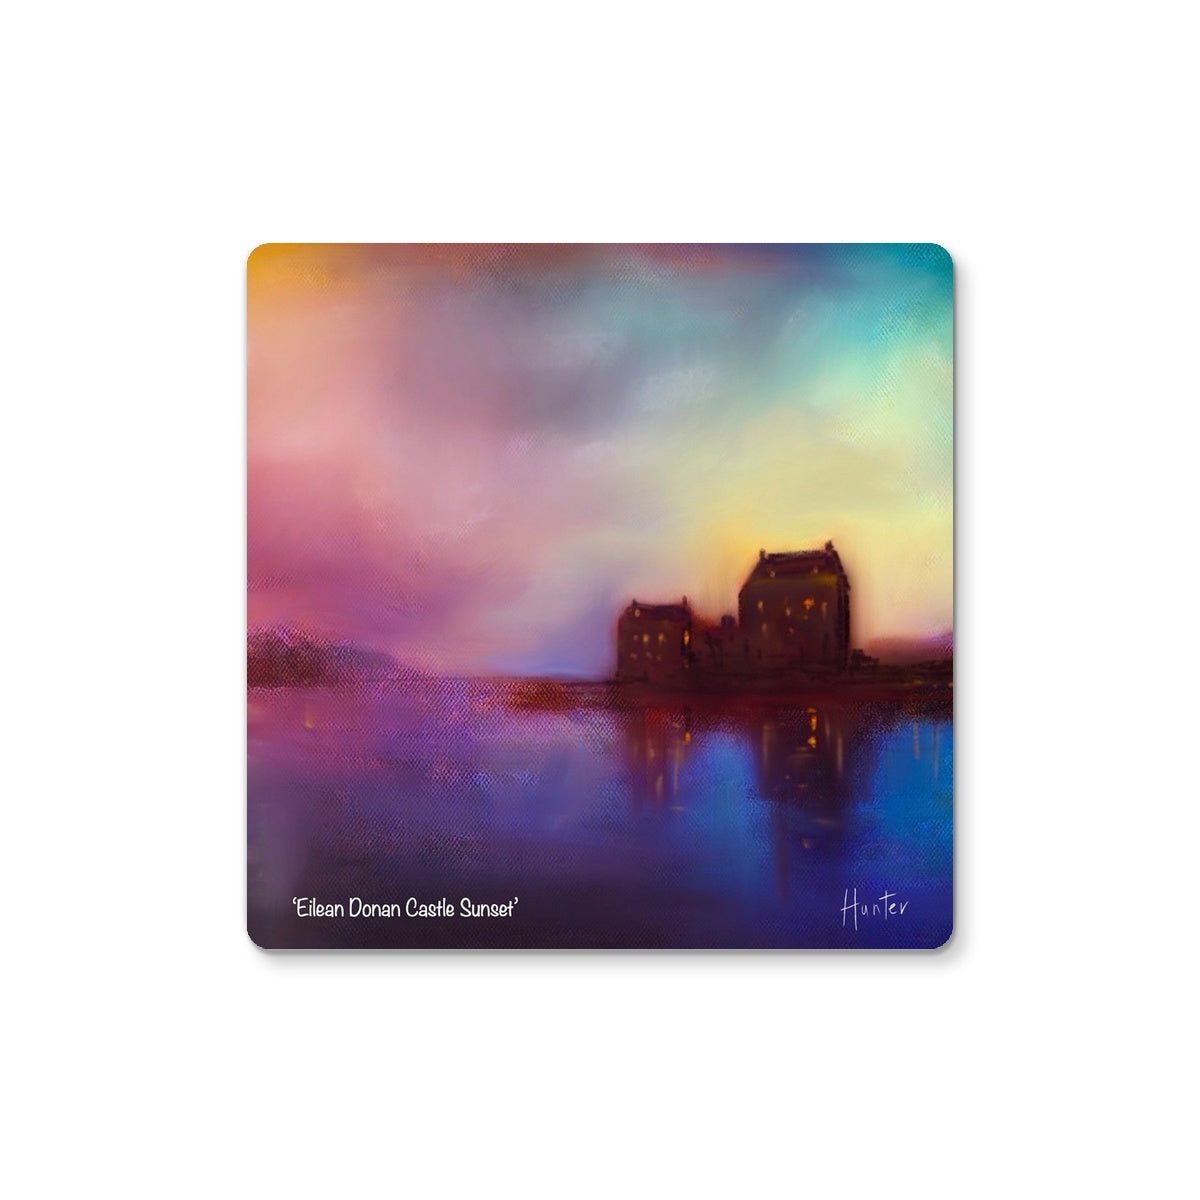 Eilean Donan Castle Sunset Art Gifts Coaster-Coasters-Scottish Castles Art Gallery-2 Coasters-Paintings, Prints, Homeware, Art Gifts From Scotland By Scottish Artist Kevin Hunter